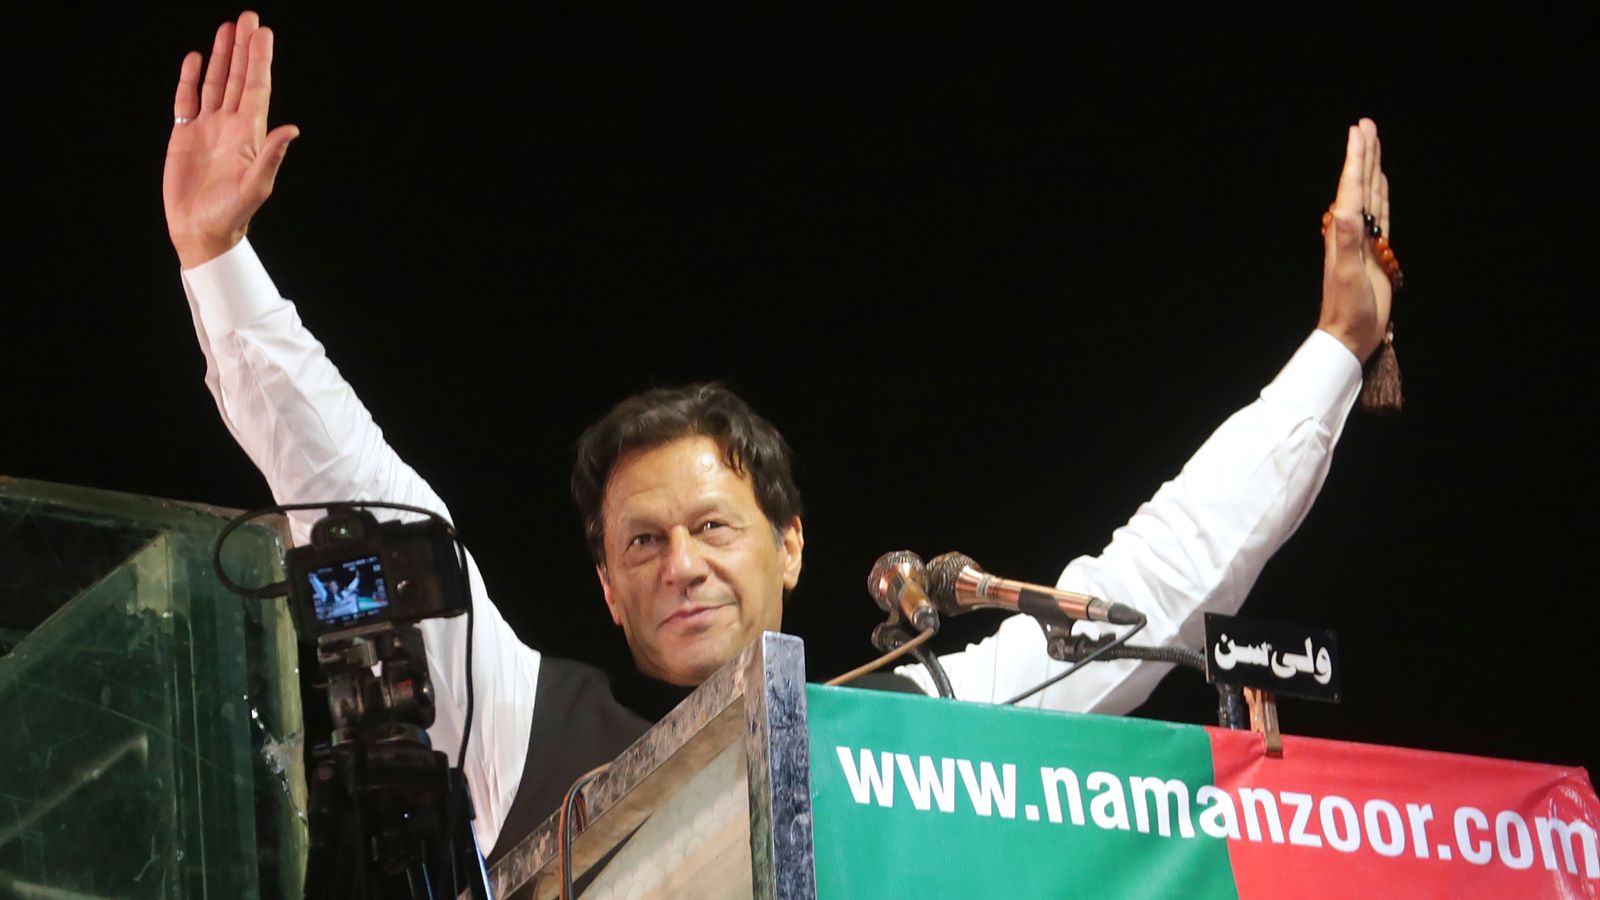 Imran Khan rejected as candidate in Pakistan's parliamentary election